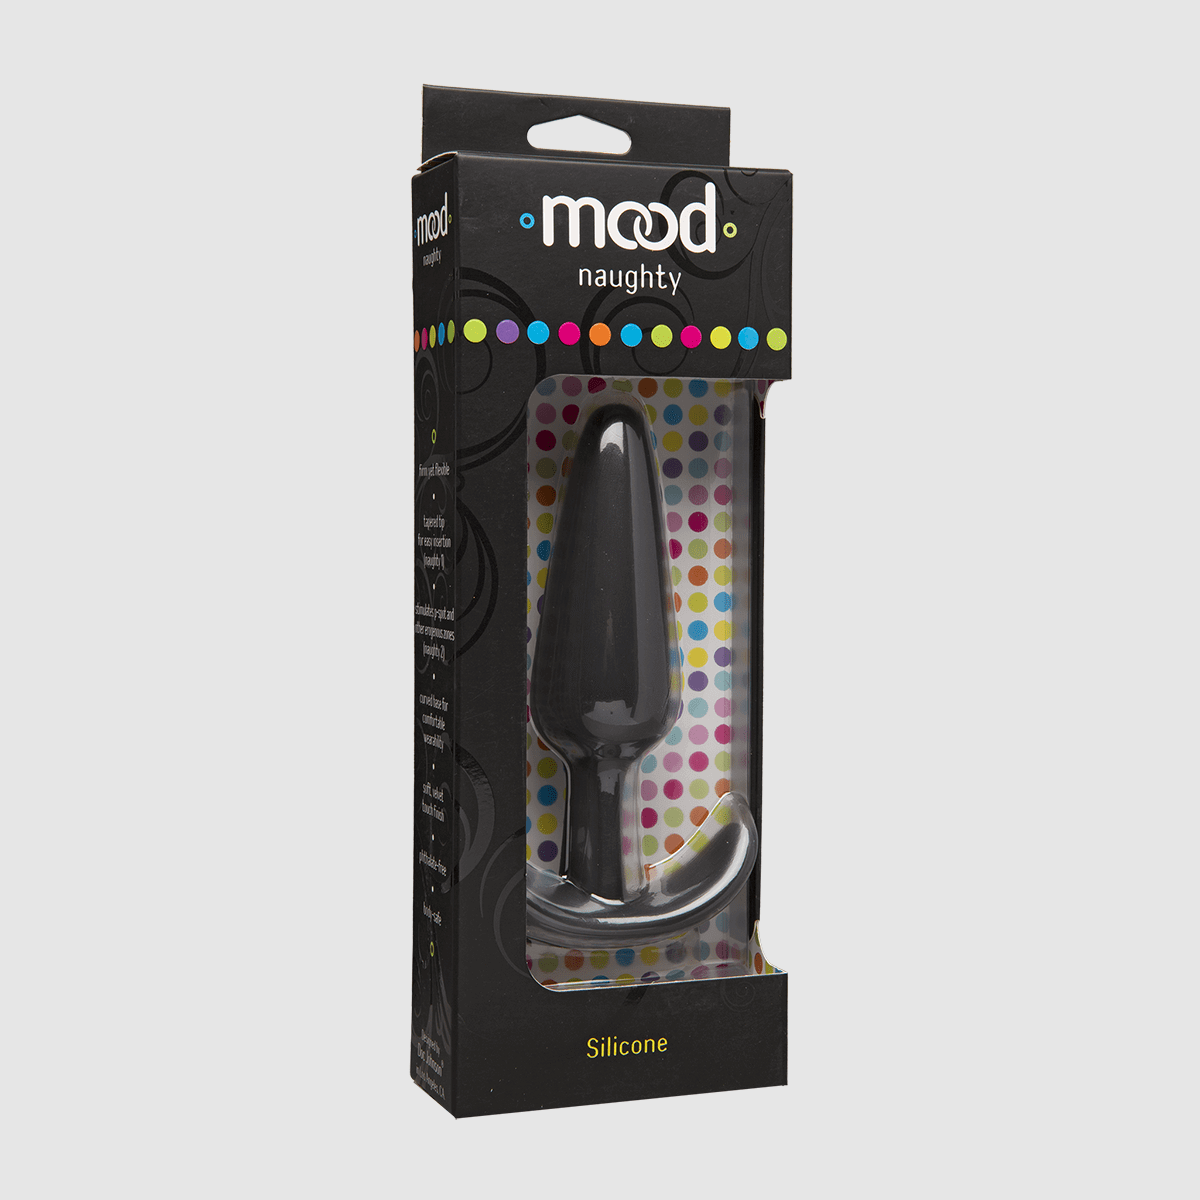 Mood Naughty 1 X-Large Tapered Plug - Black - Thorn & Feather Sex Toy Canada